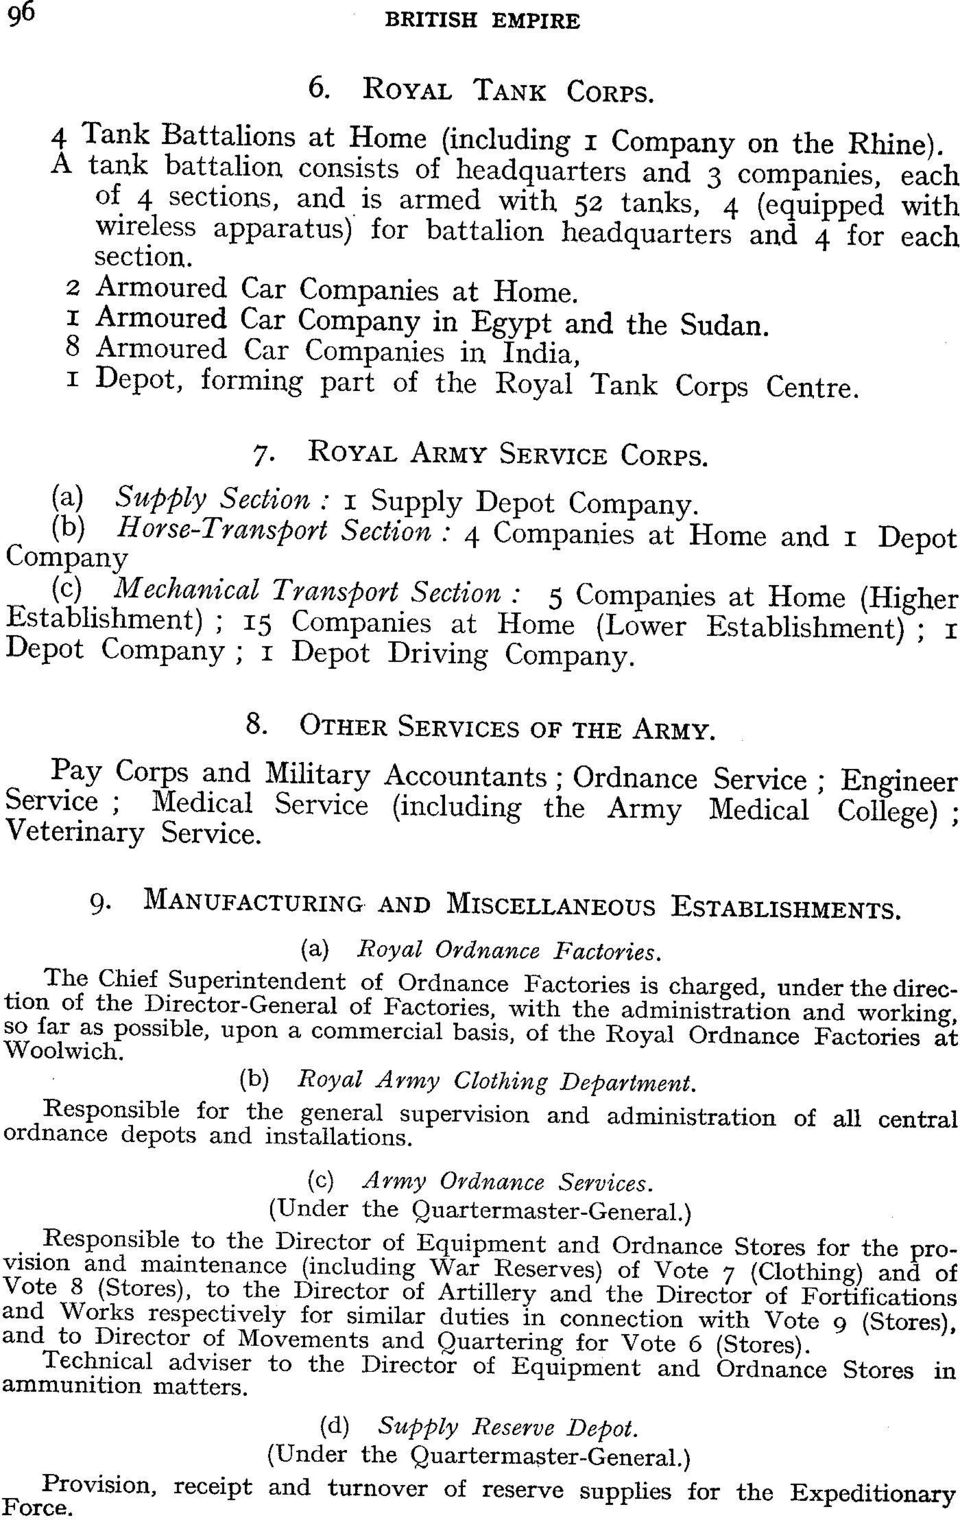 2 Armoured Car Companies at Home. i Armoured Car Company in Egypt and the Sudan. 8 Armoured Car Companies in India, i Depot, forming part of the Royal Tank Corps Centre. 7. ROYAL ARMY SERVICE CORPS.